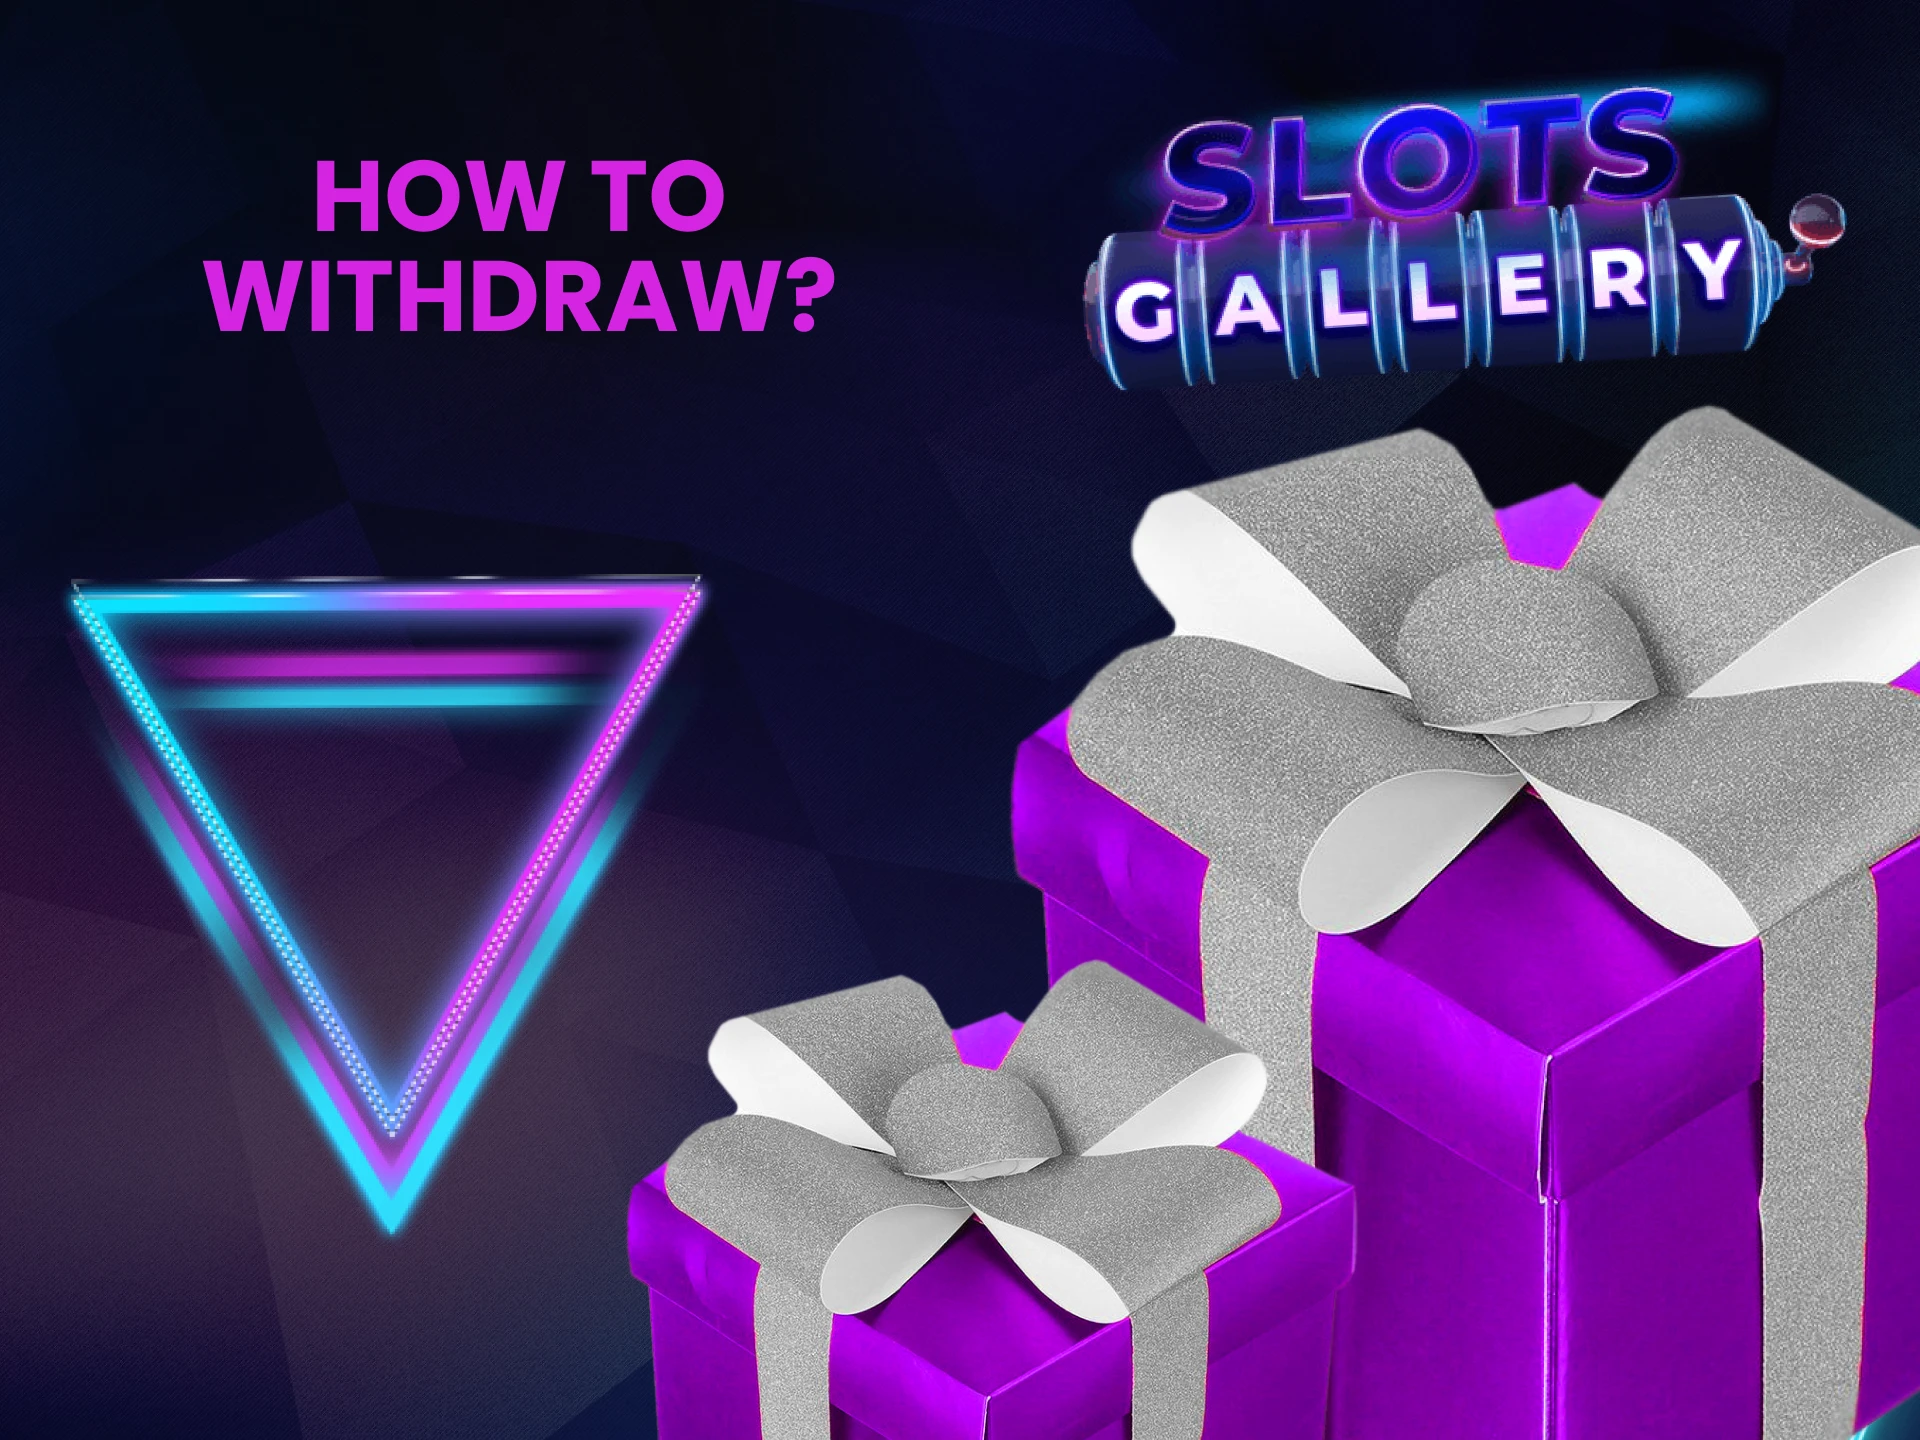 We will tell you how to withdraw bonuses received on SlotsGallery.